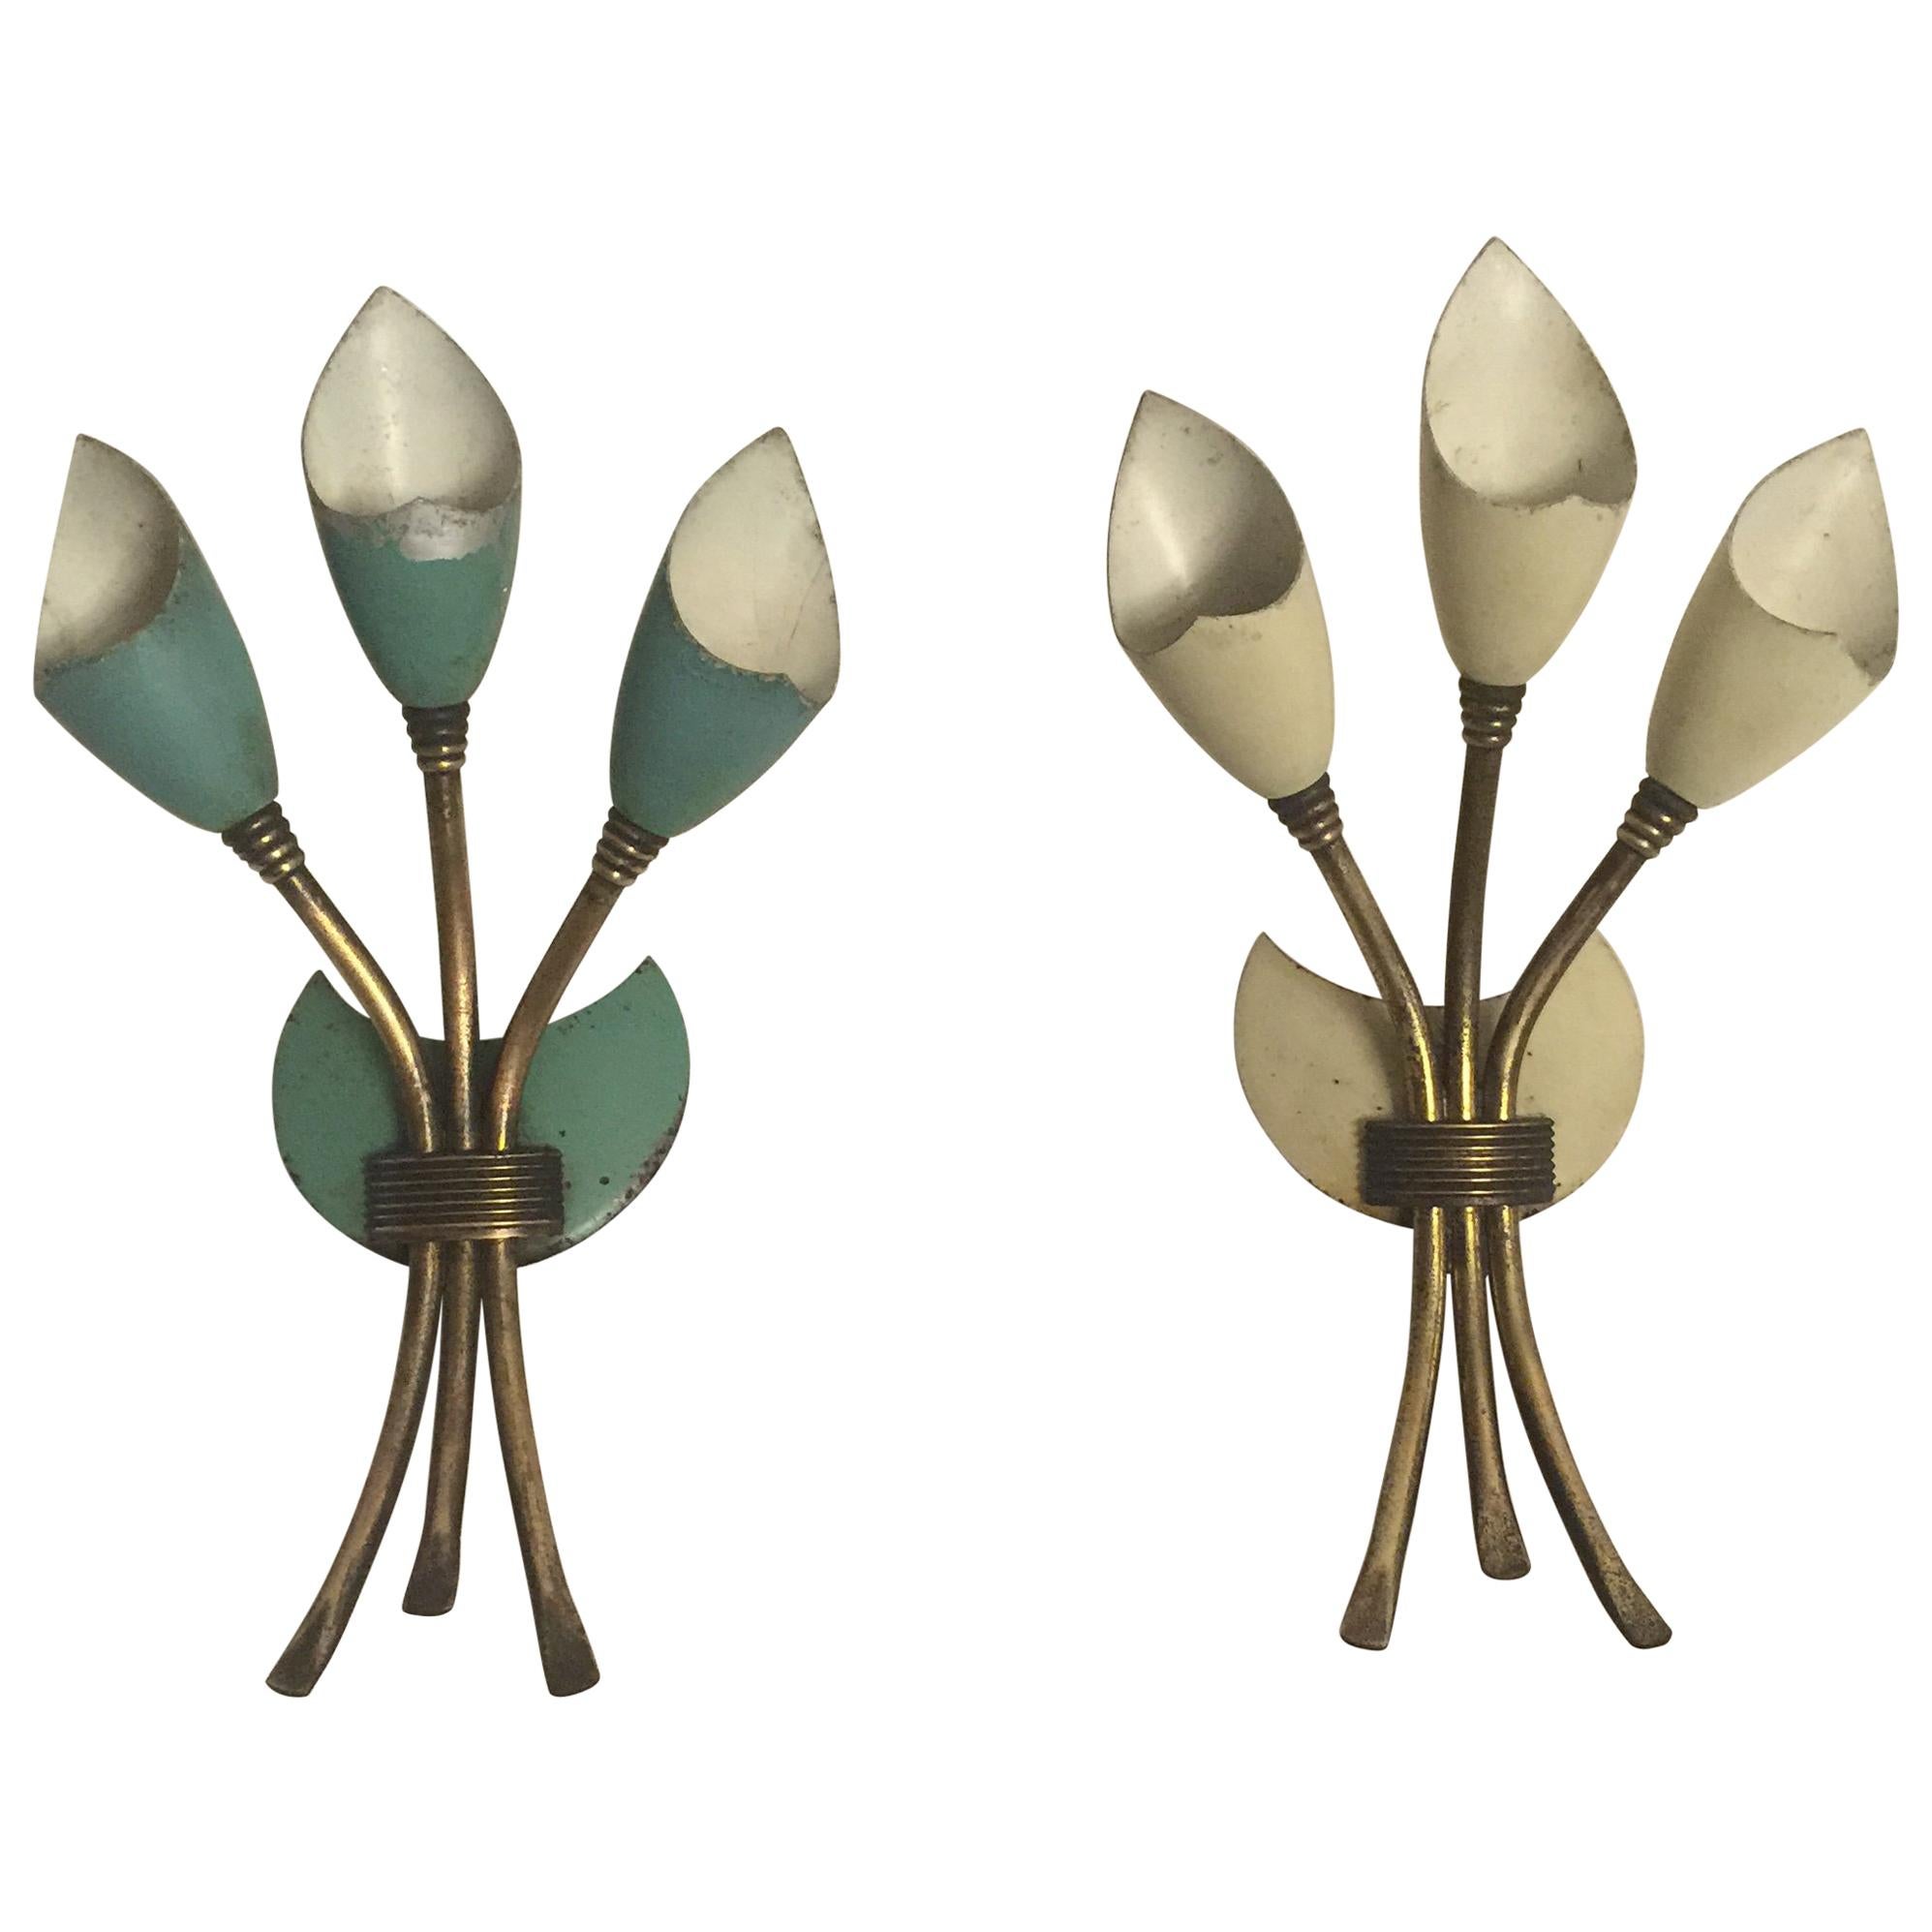 Pair of Midcentury Italian Metal Sconces in the Manner of Arredoluce Monza For Sale